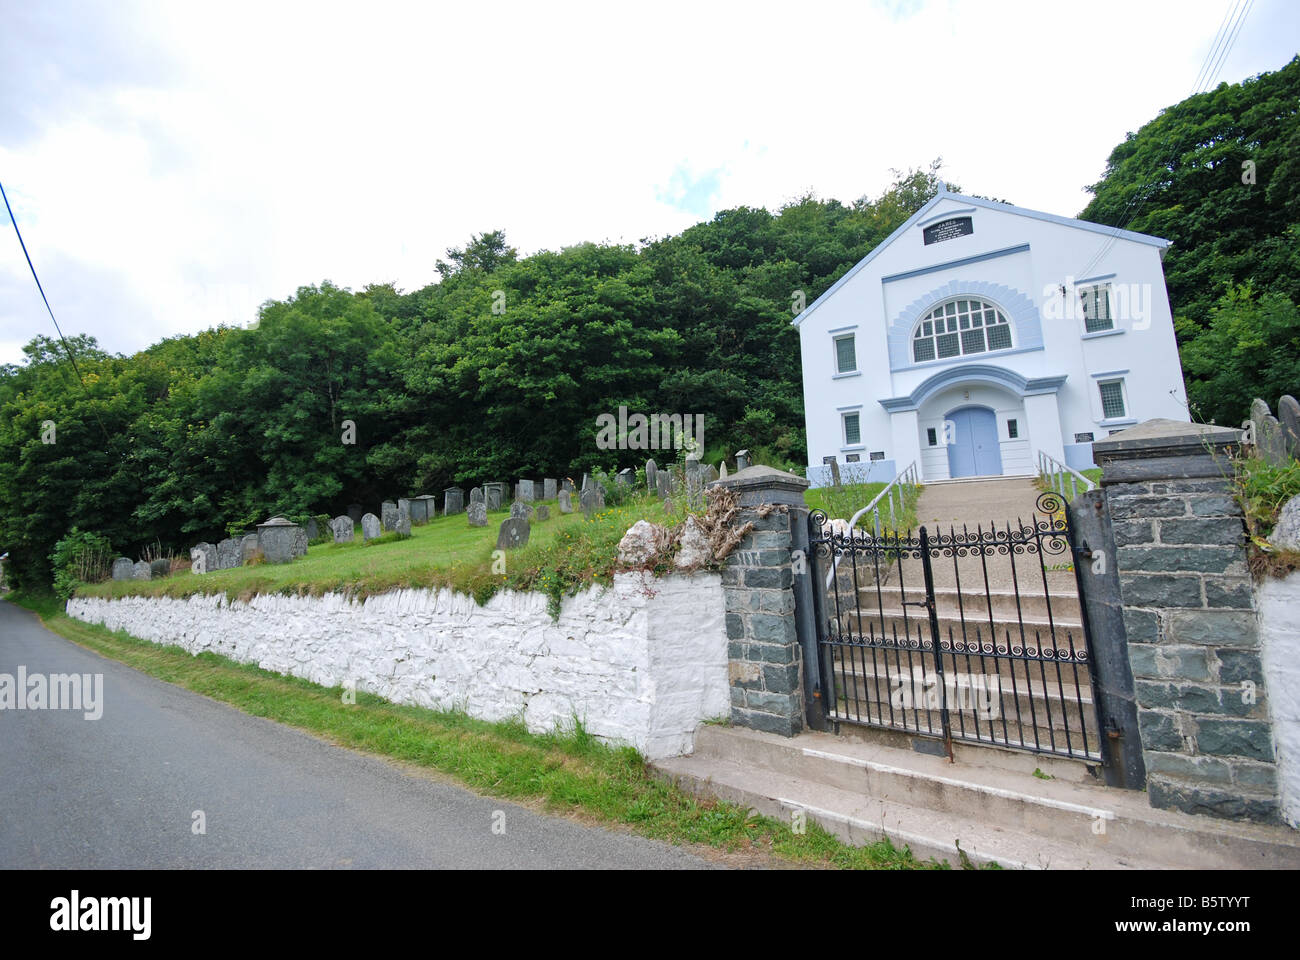 Jabes Baptist chapel in the Gwaun valley Pembrokeshire Wales Stock Photo